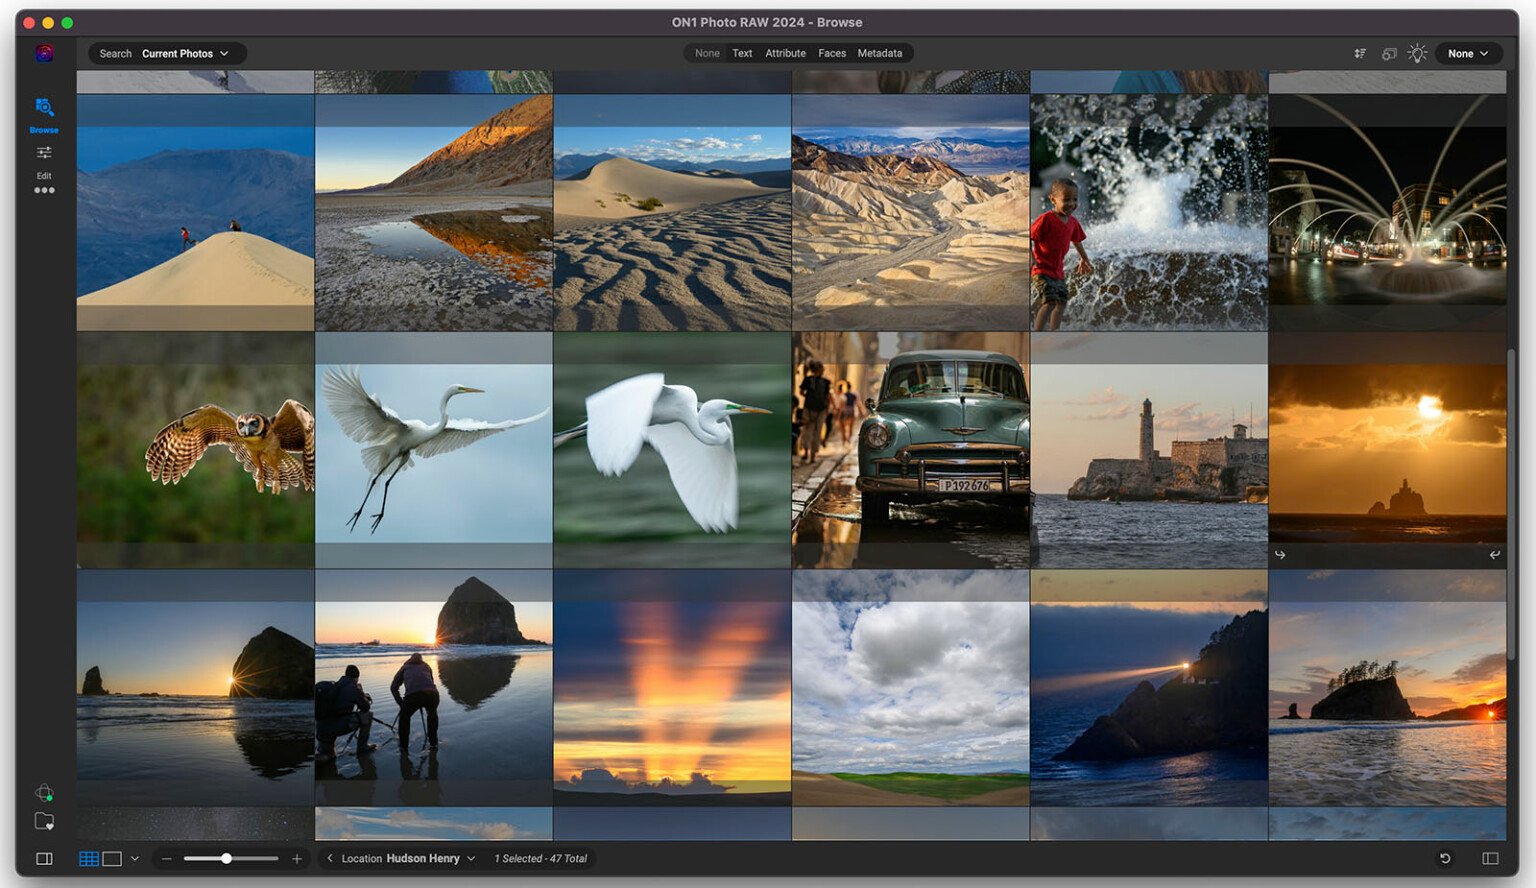 ON1 Photo RAW 2024.1 v18.1.0.14842 (x64) Multilingual On1-photo-raw-2024-browse-1536x888